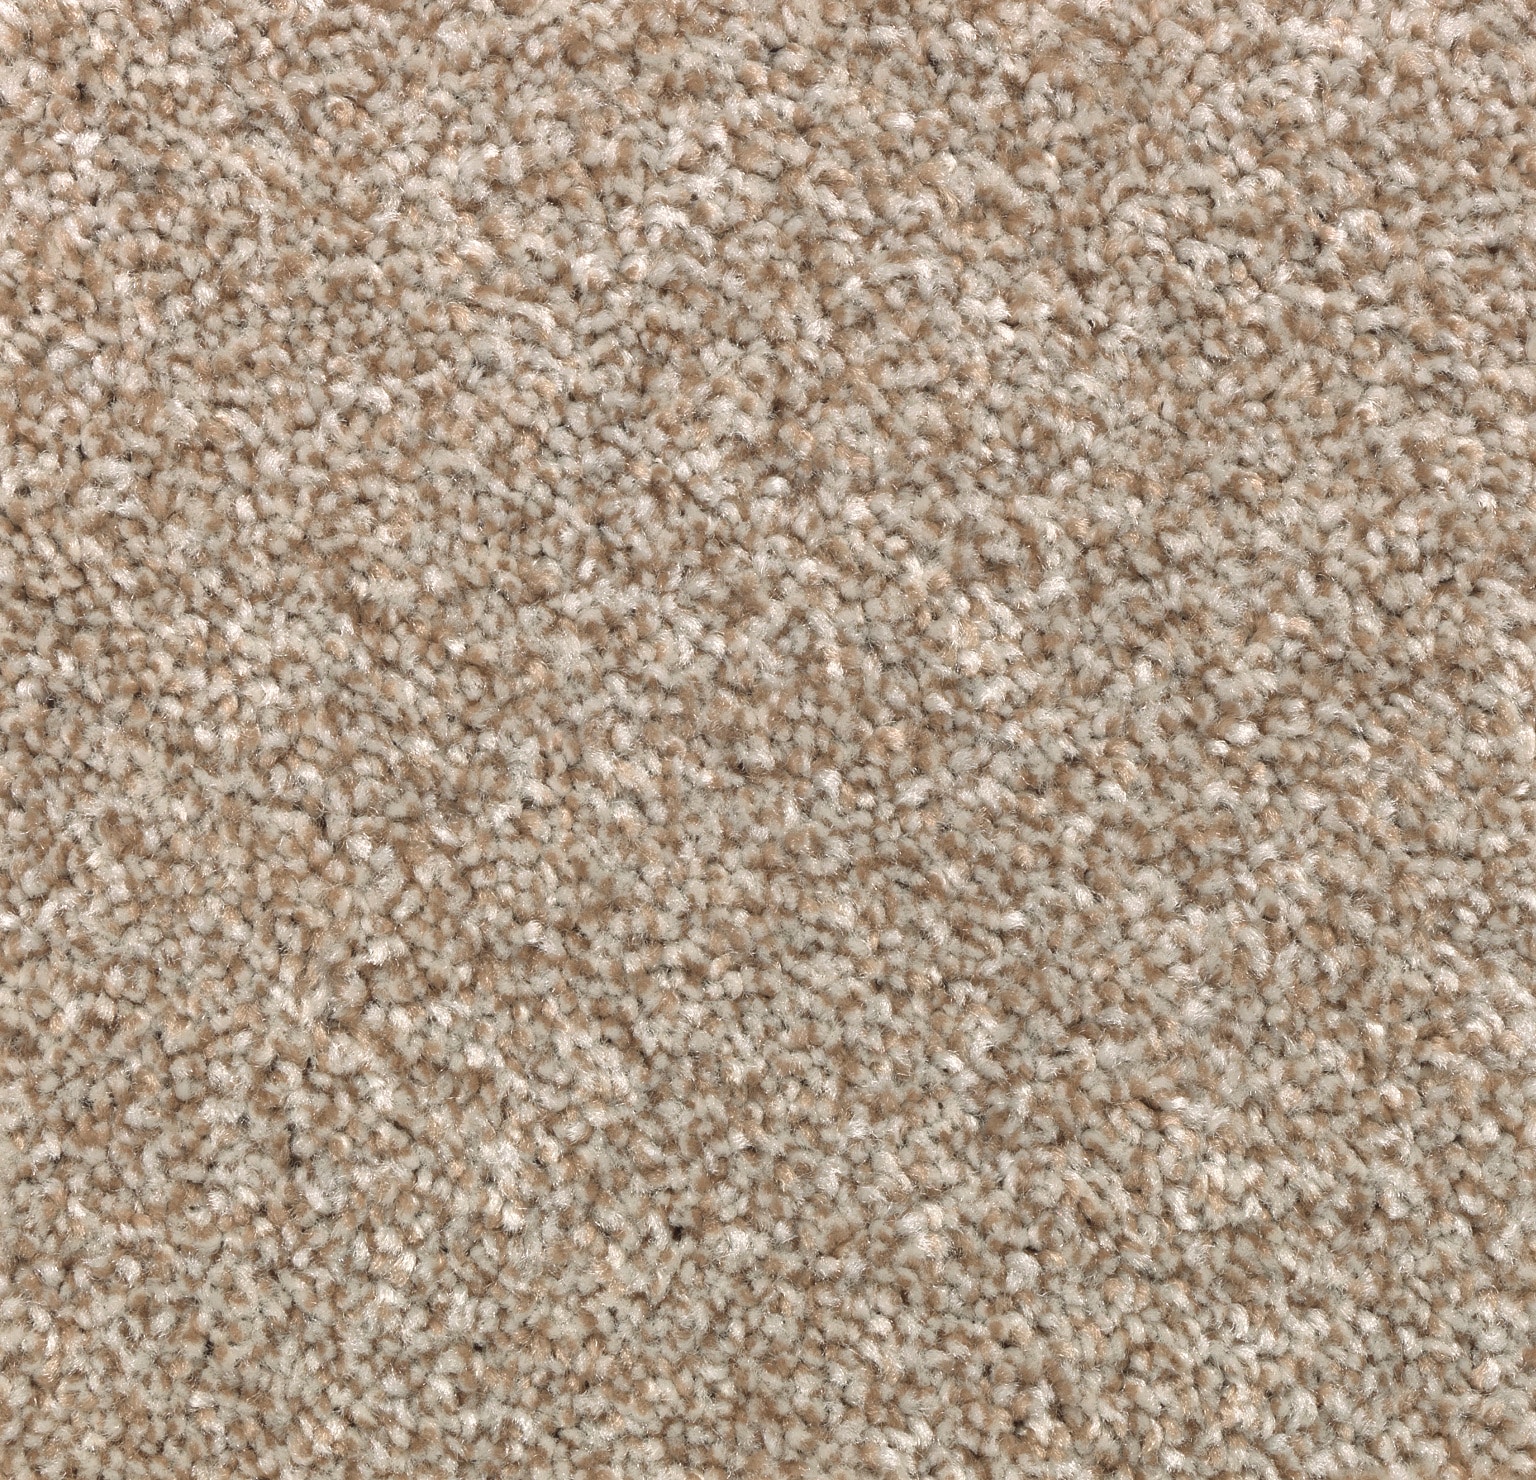 STAINMASTER (Sample) Durable Carrington at II Samples in Carpet Step Carpet the Beige department Textured